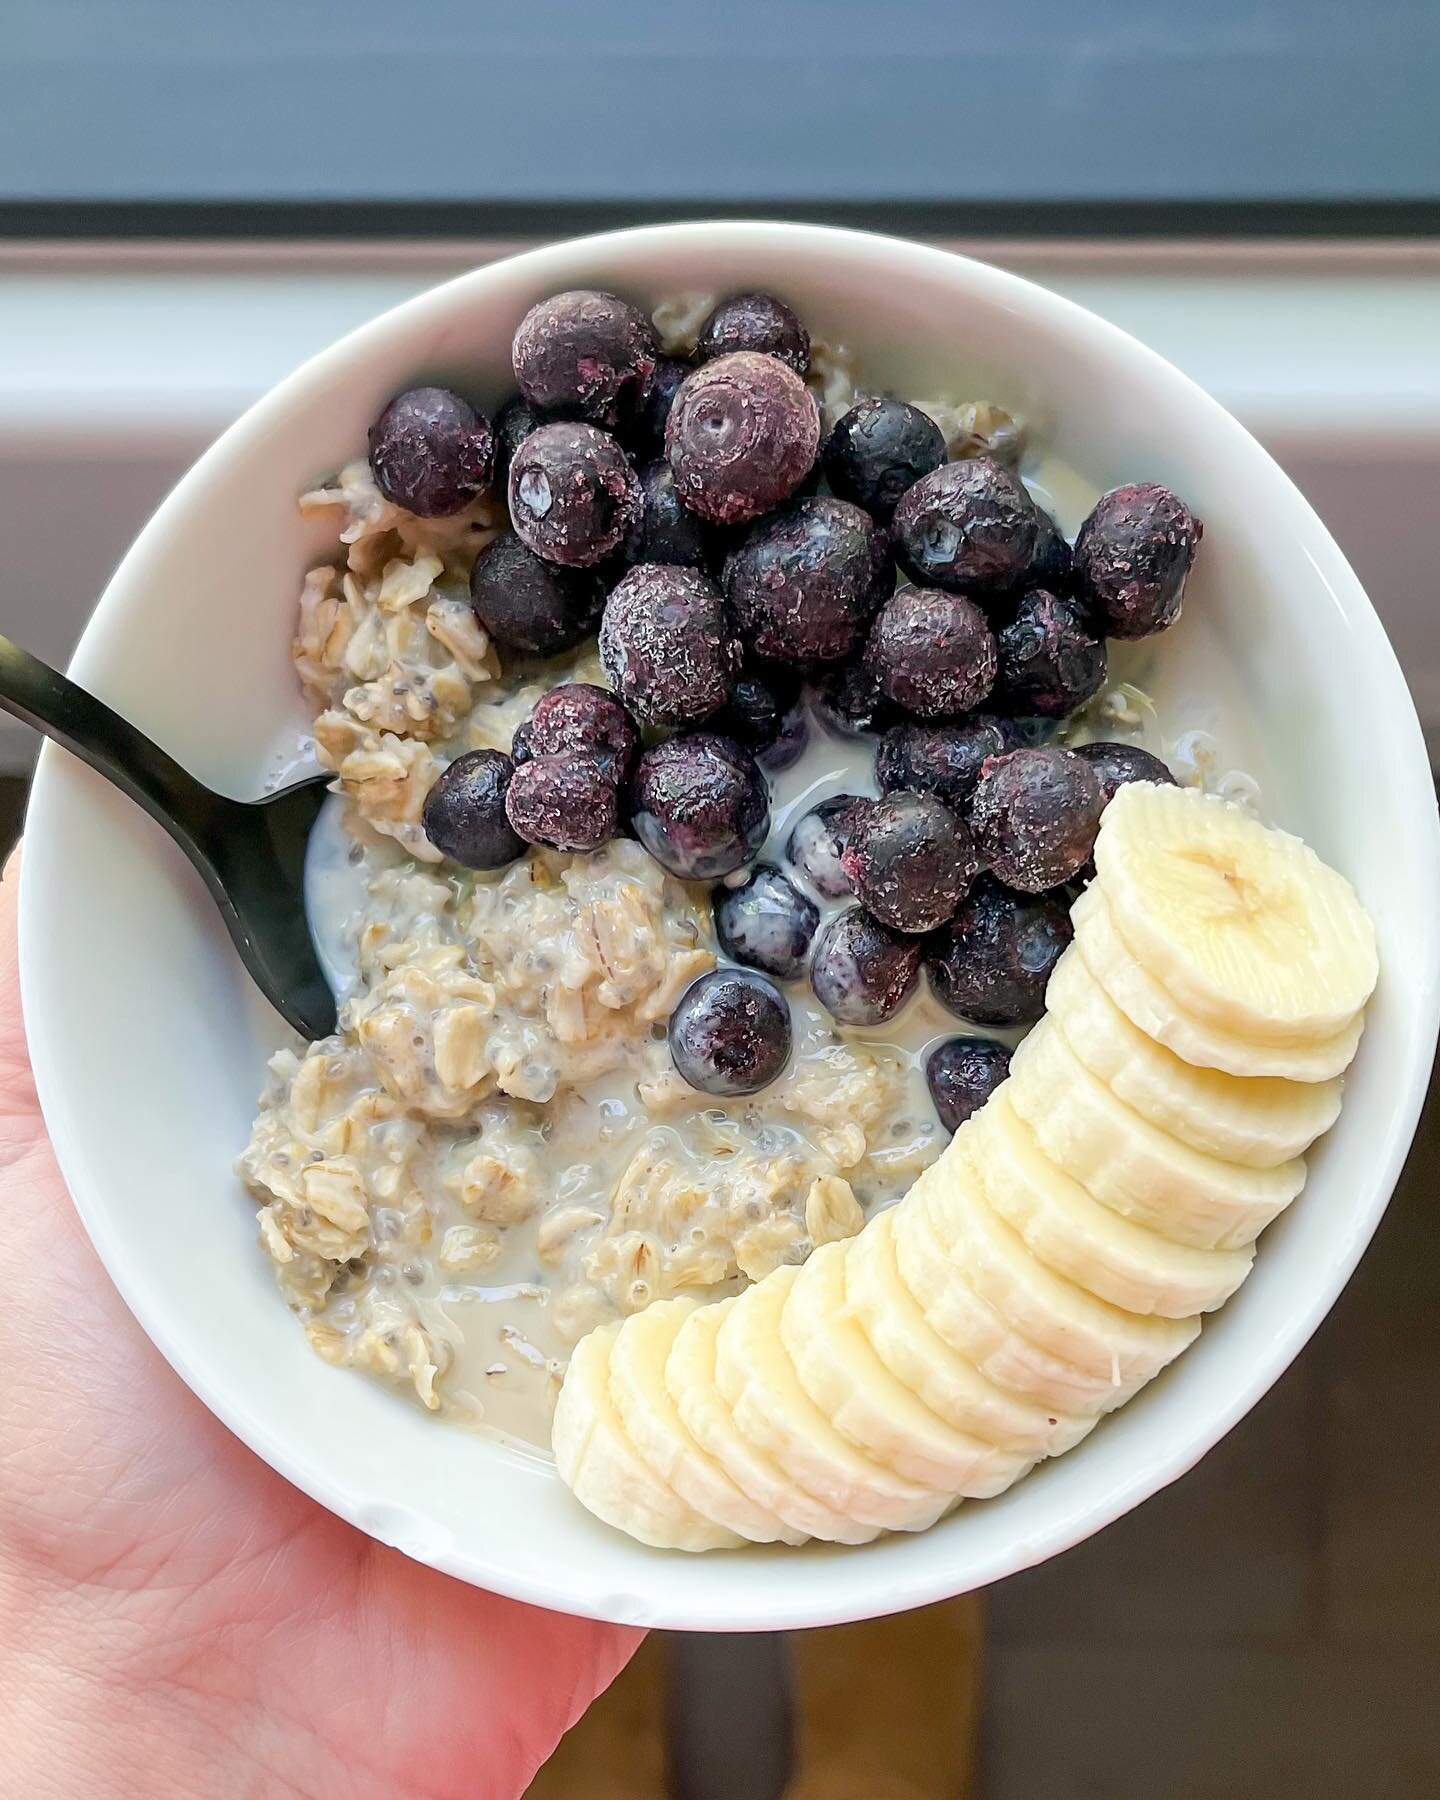 🤯WHAT&rsquo;S THIS? An actual picture post&hellip;

❤️❤️ Double tap if the algorithm is letting you see it since it isn&rsquo;t a video - I&rsquo;d be curious to know. 

This yummy photo is what I ate for breakfast. Yummy blueberry and banana chia o